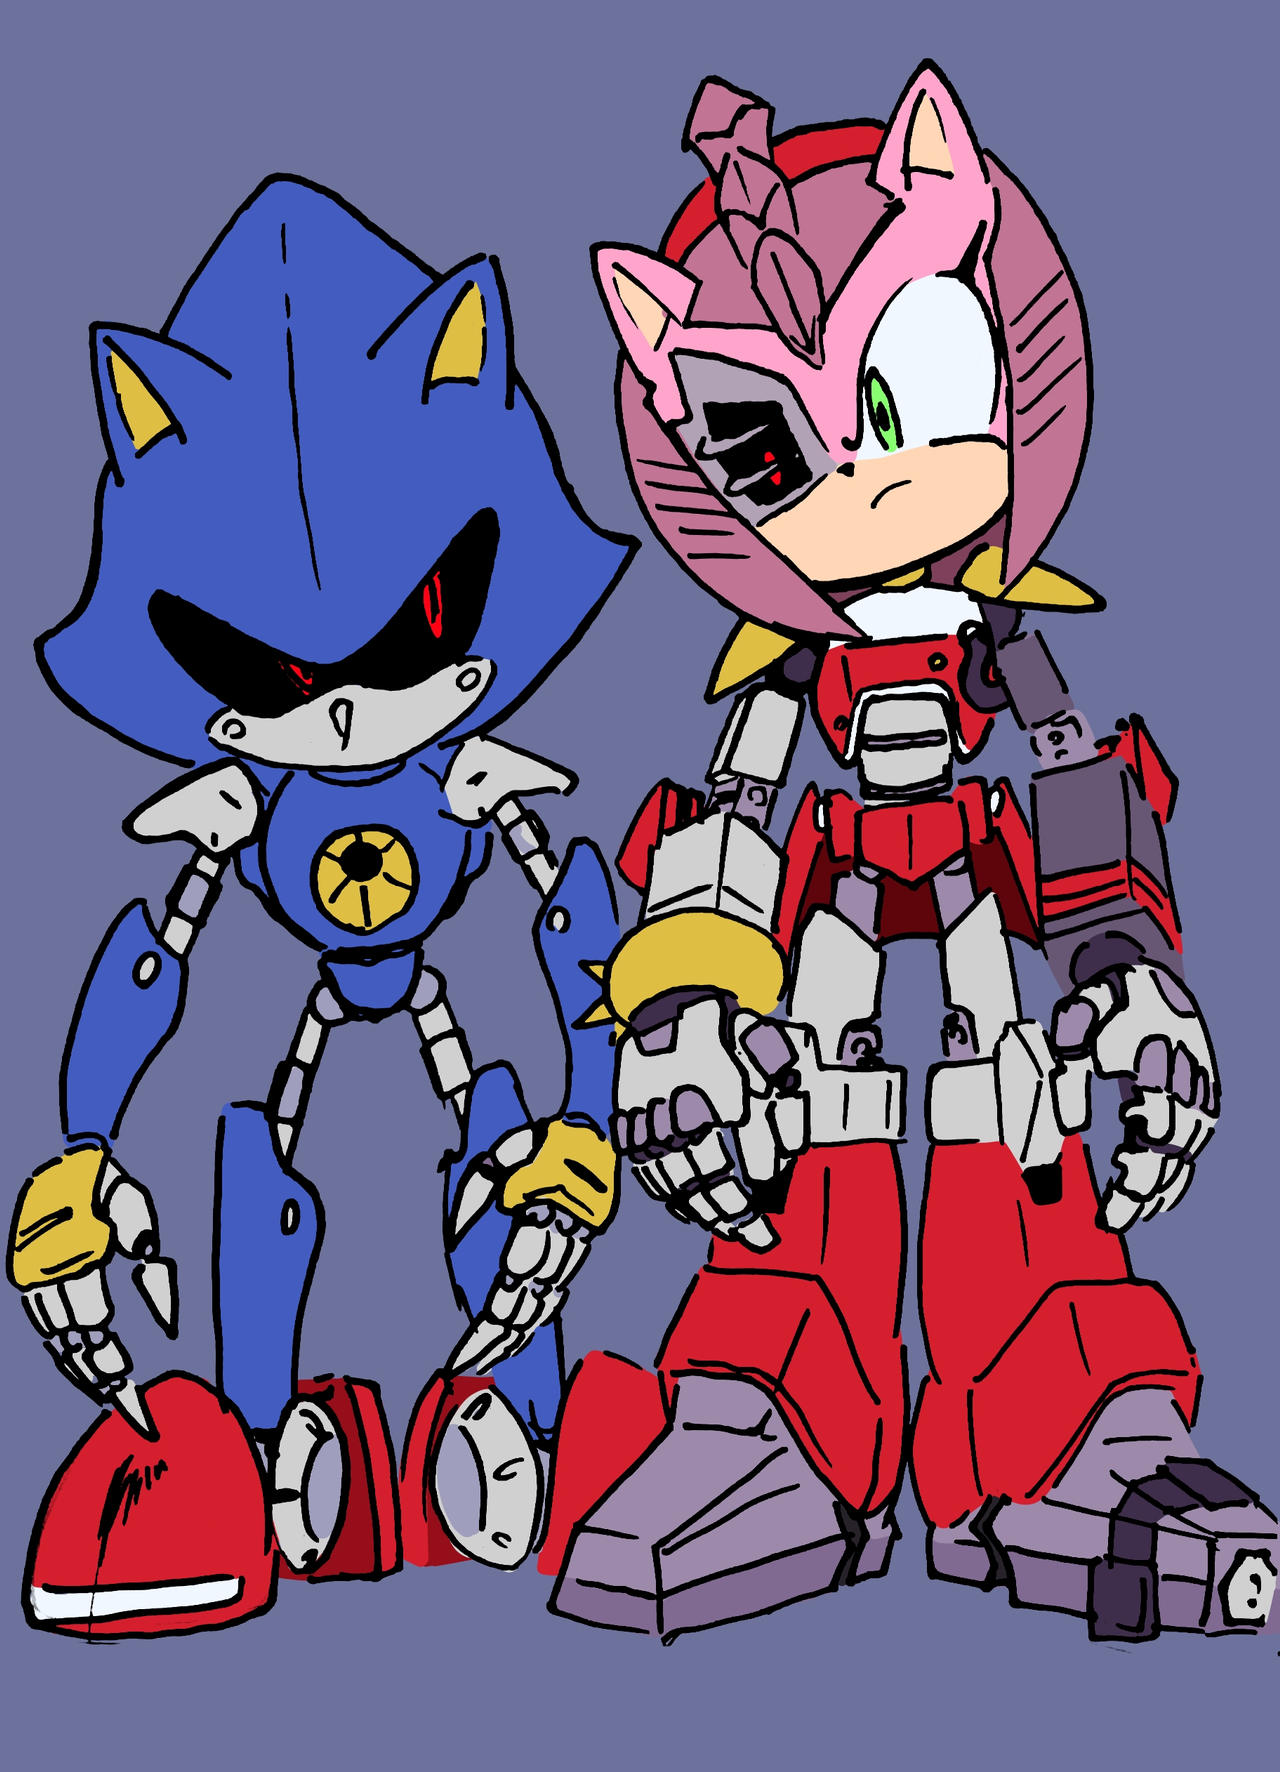 metal sonic (sonic and 3 more) drawn by cyberlord1109